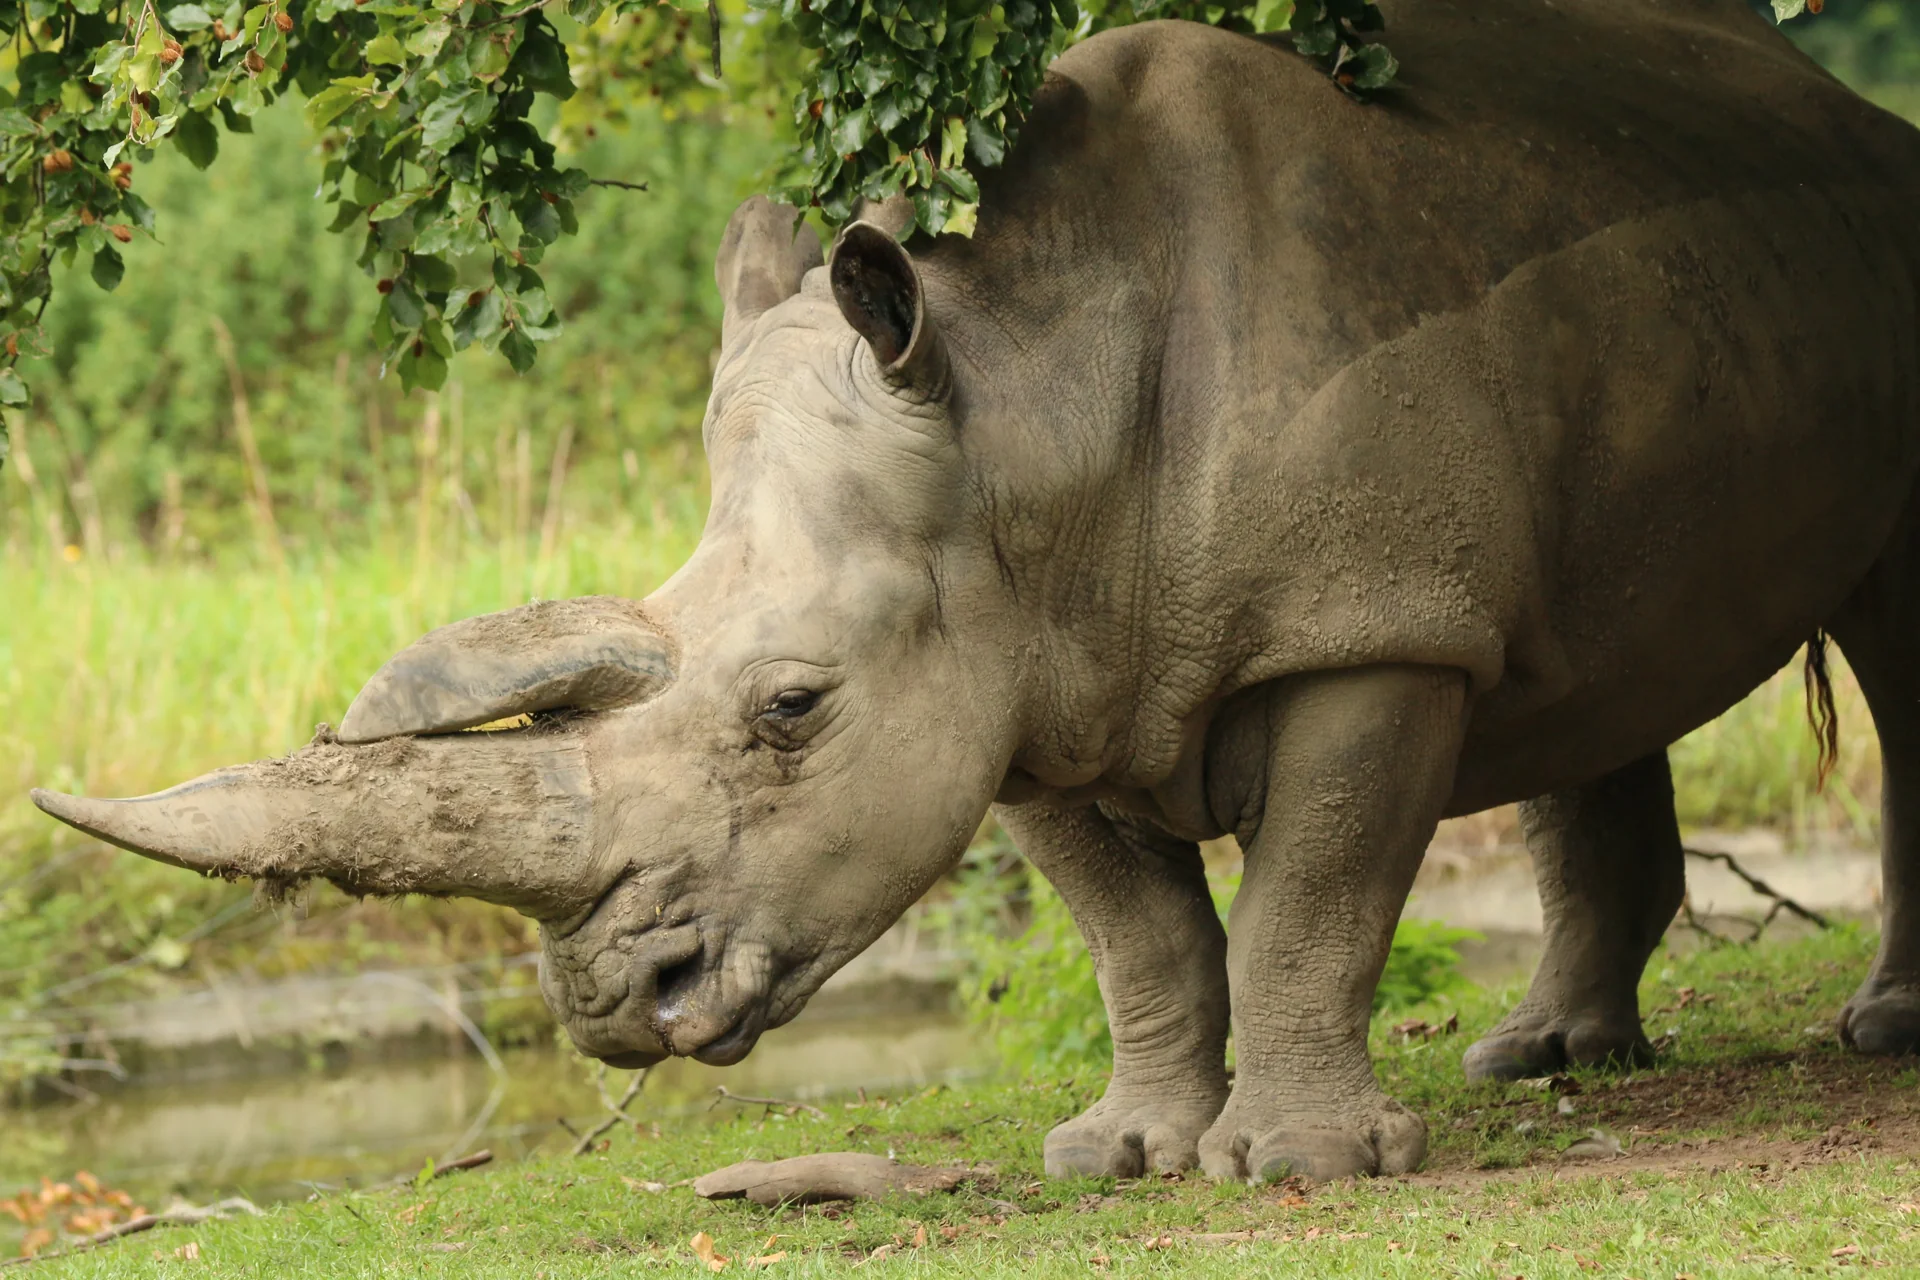 Close up of a rhino standing below a larger tree in the grass. The horn looks massive and it seems to have had a mud bath recently.